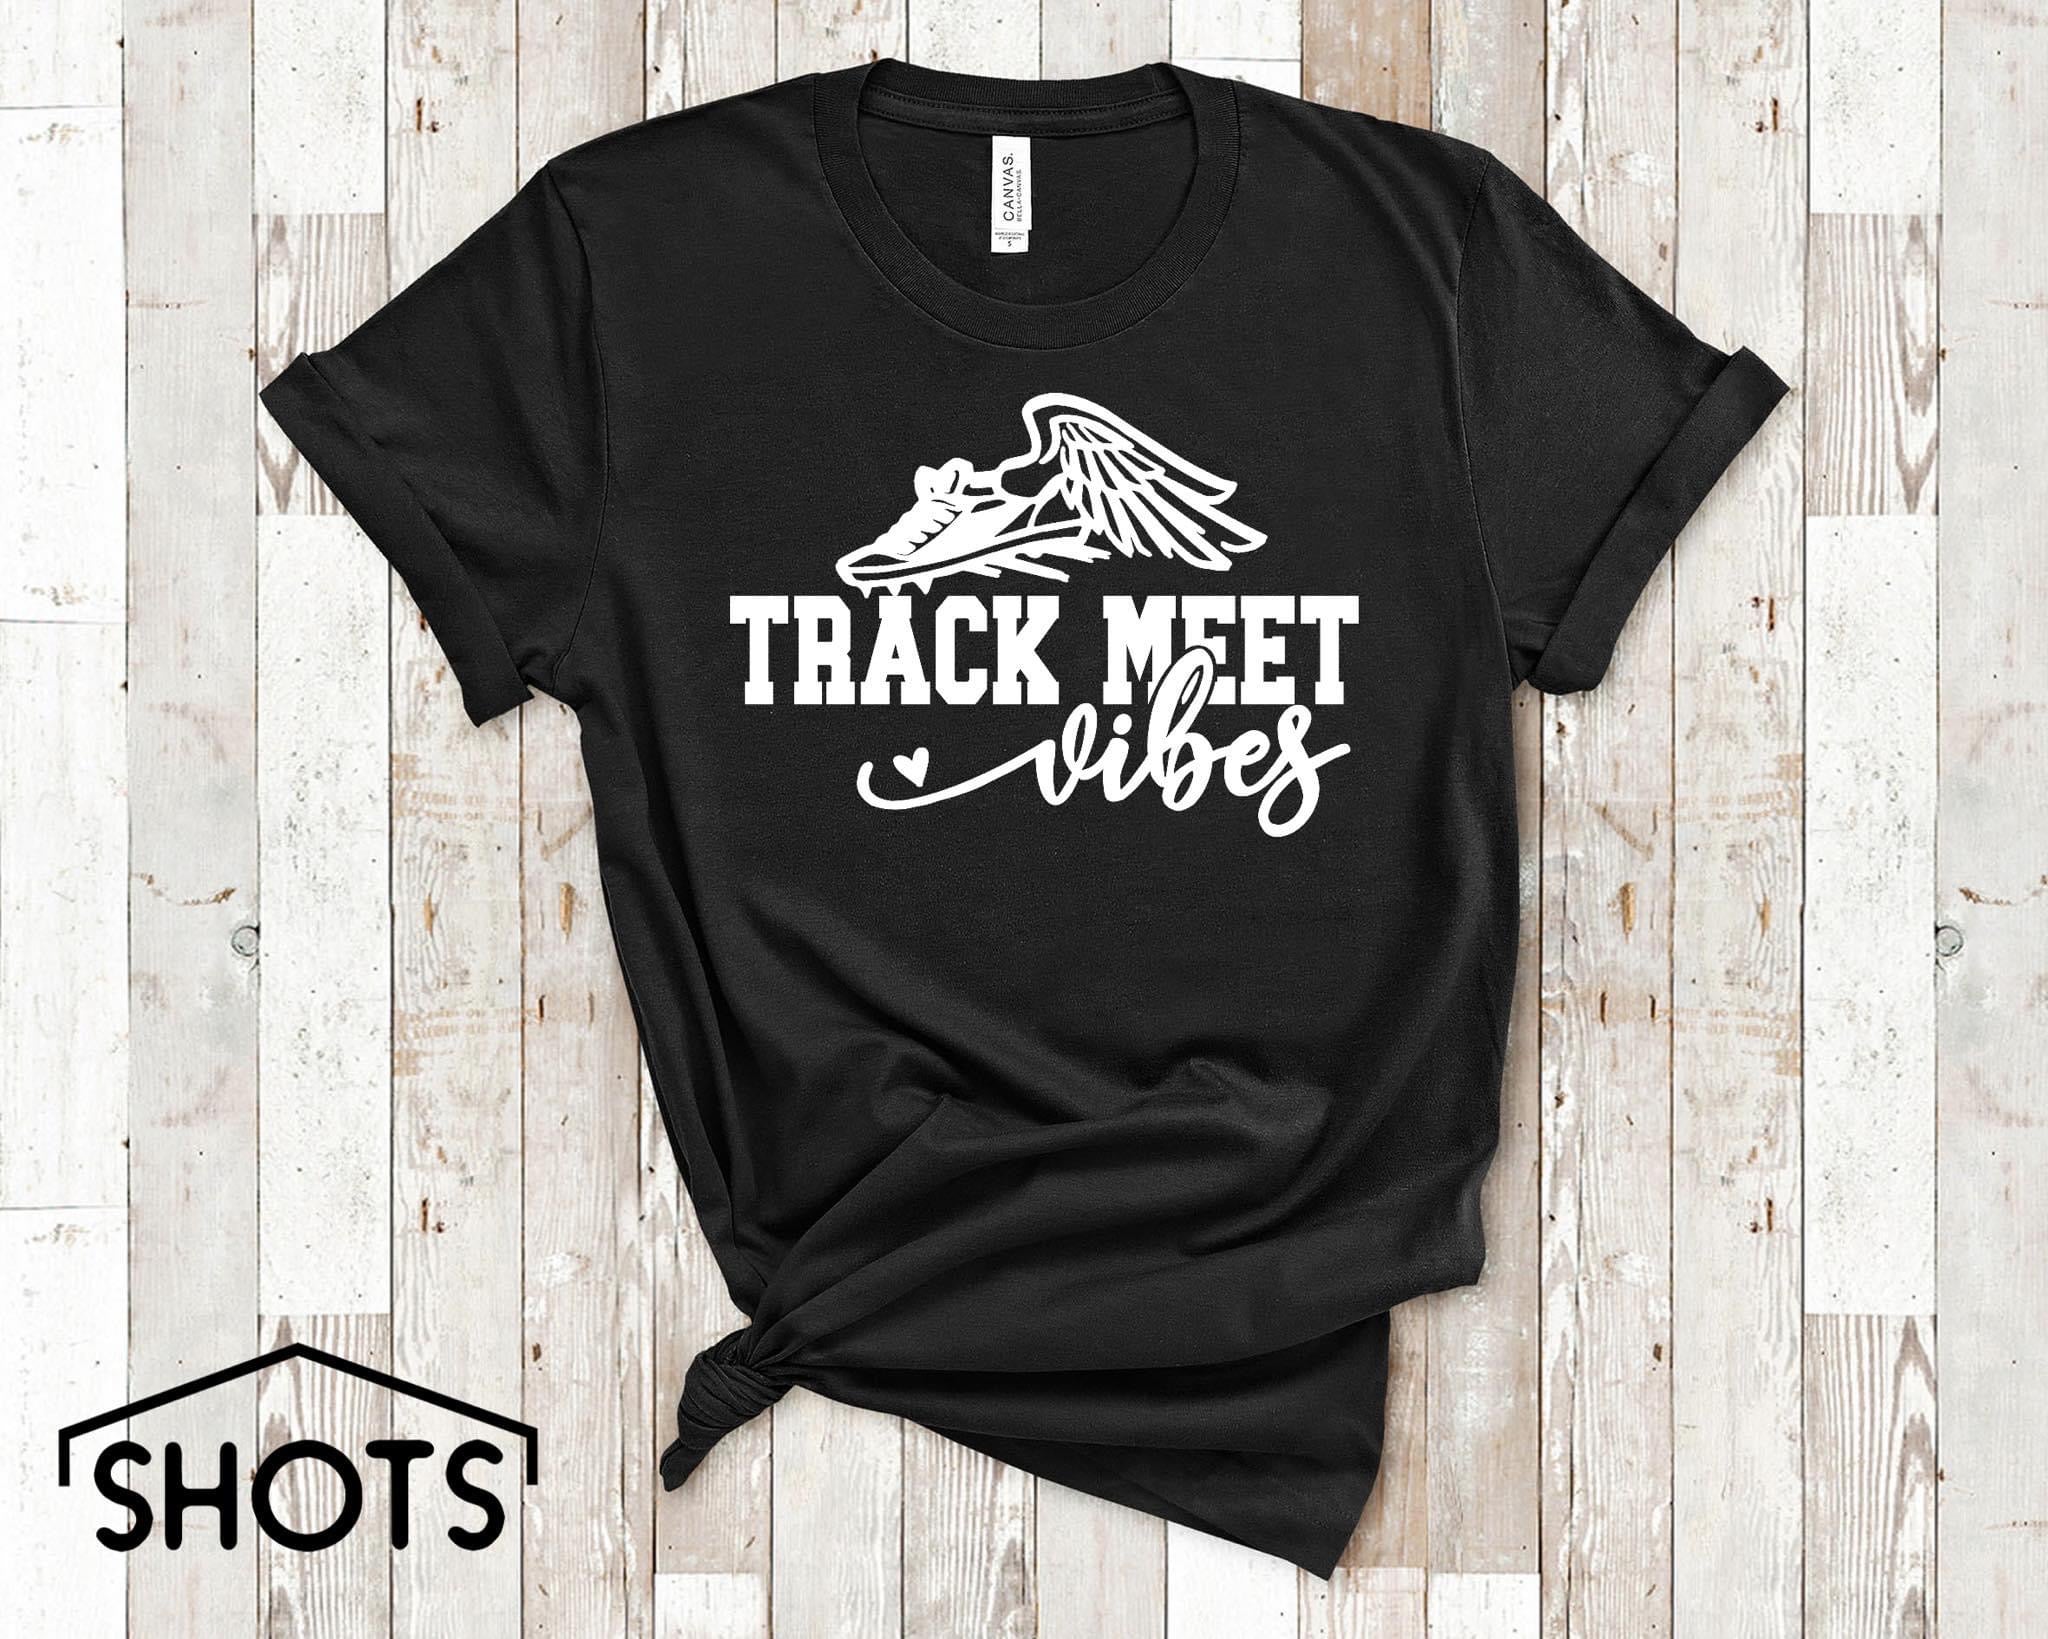 track and field shirts sayings